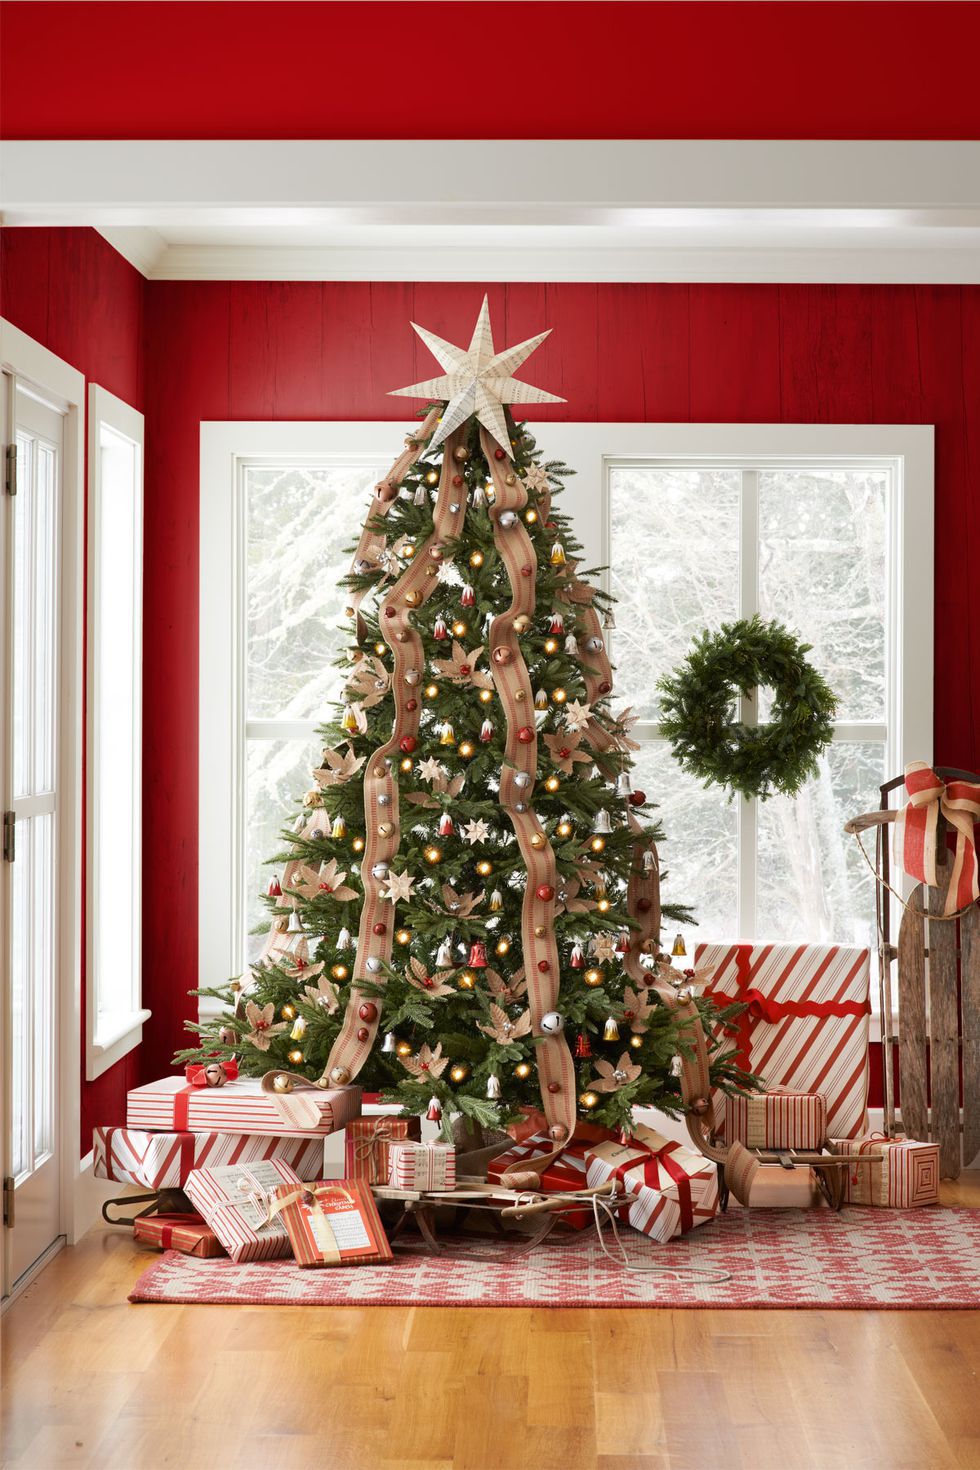 30 Decorated Christmas Tree Ideas - Pictures of Christmas Tree